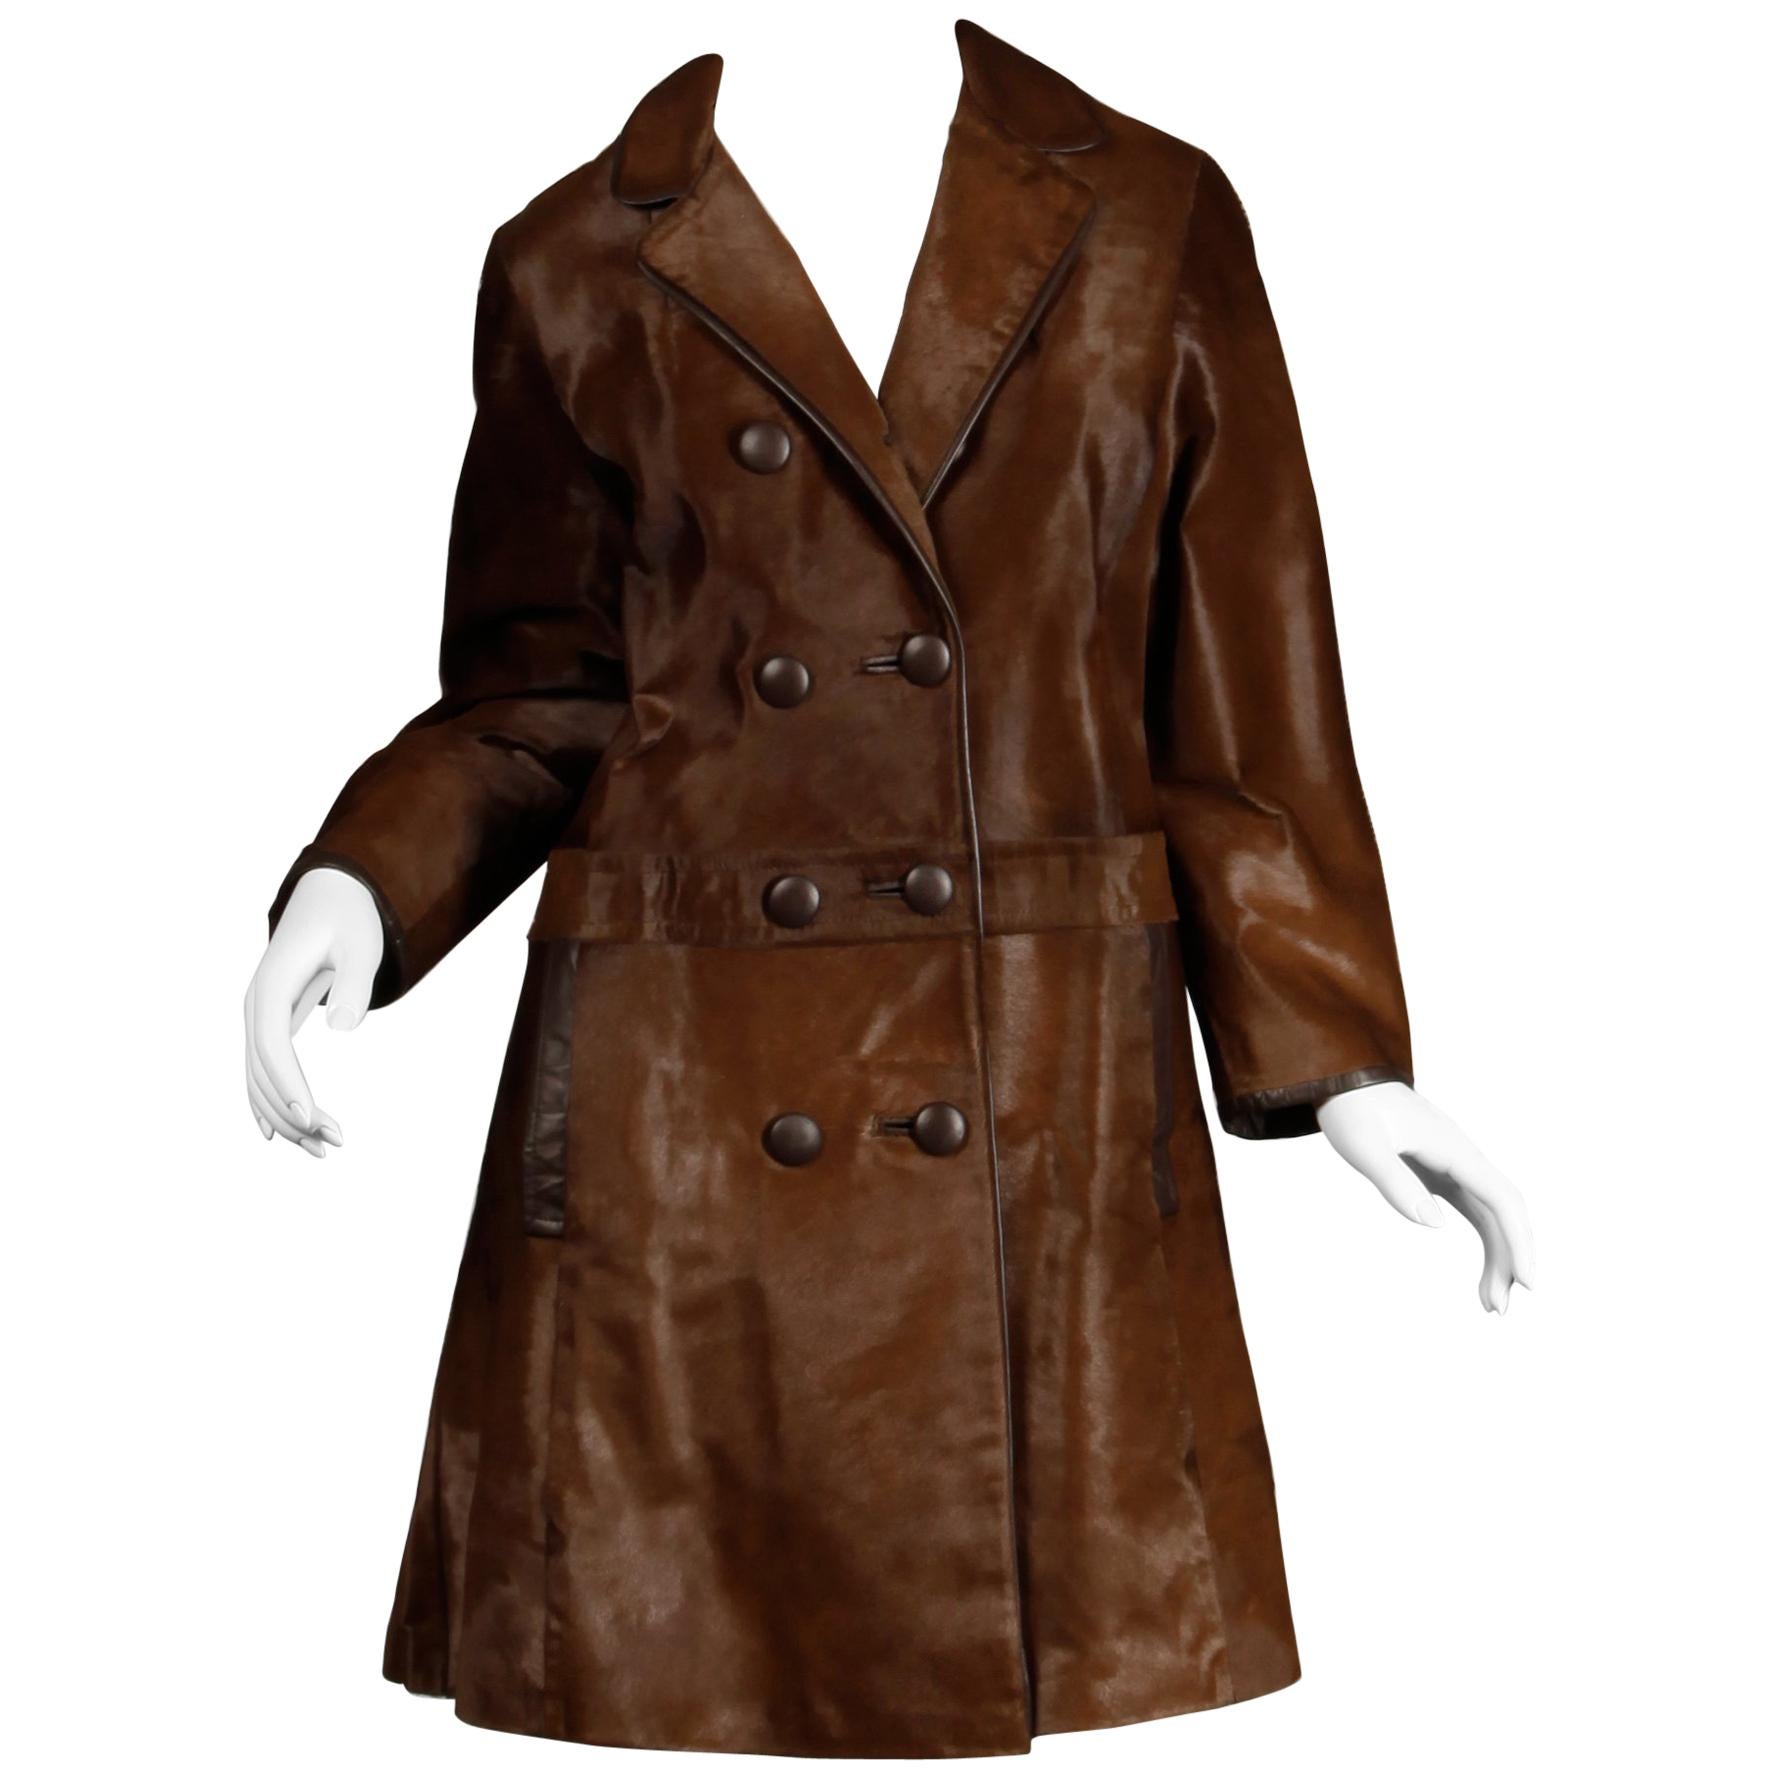 Stunning 1960s Vintage Pony Hair or Cowhide Brown Fur Coat with Leather ...